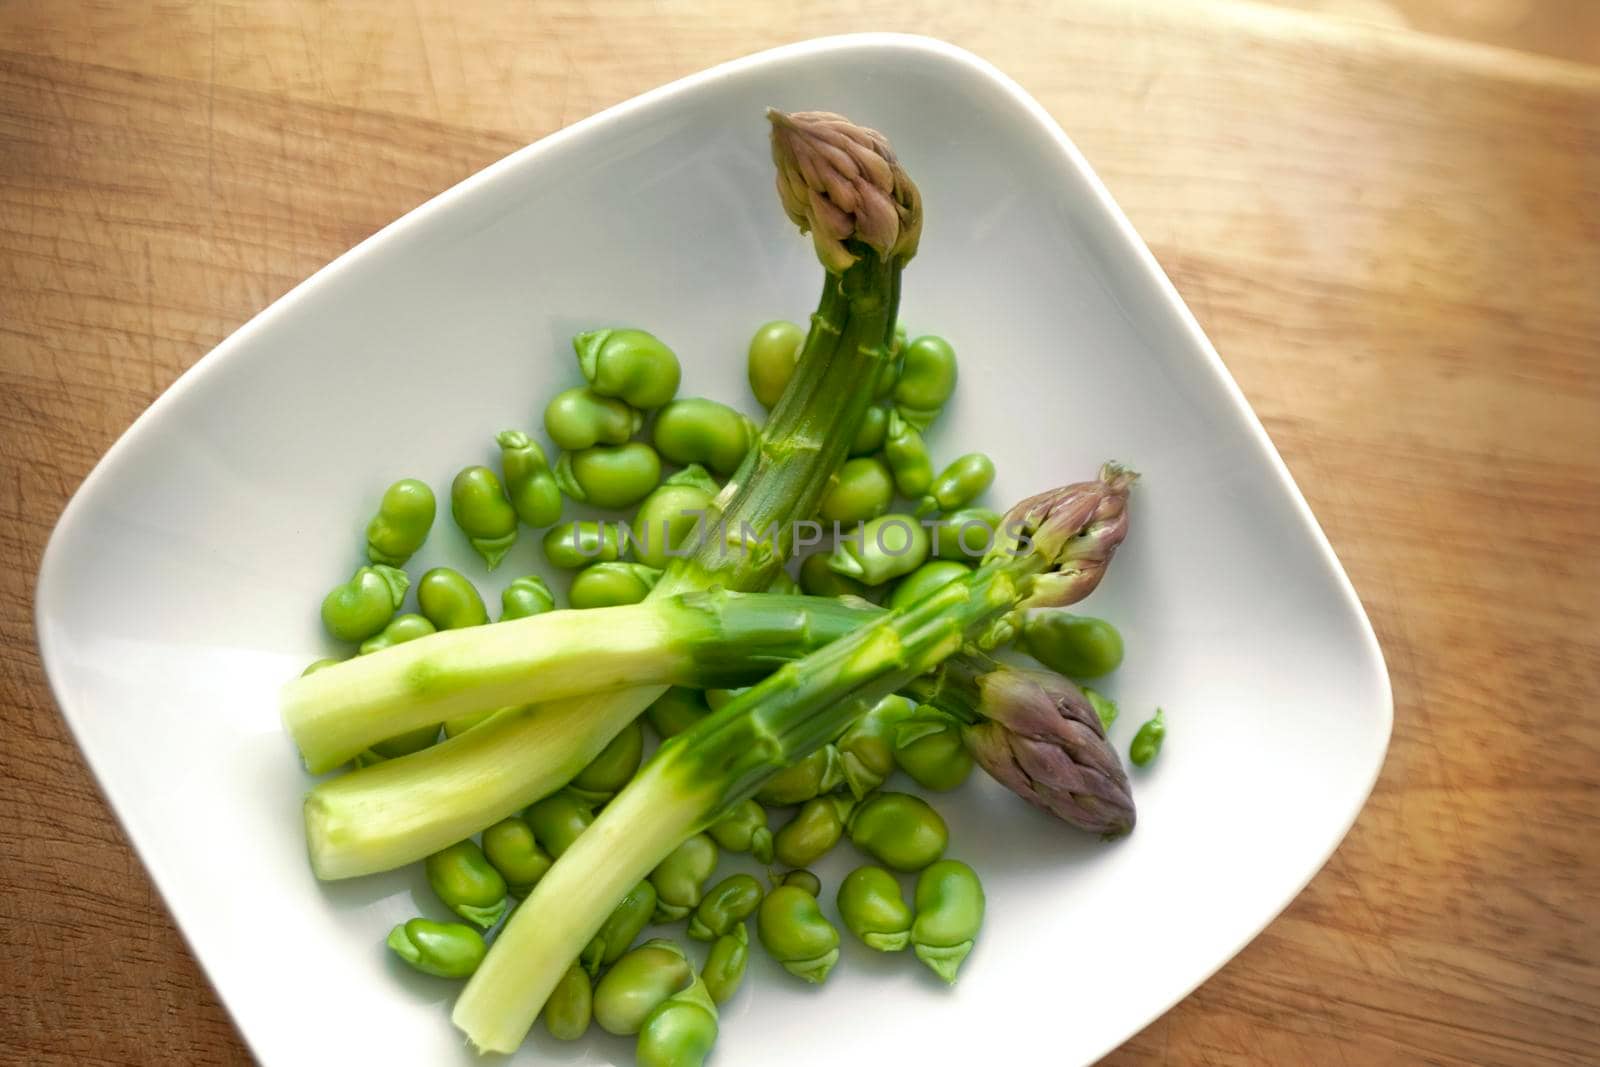 Violet asparagus and green peas in a porcelain dish